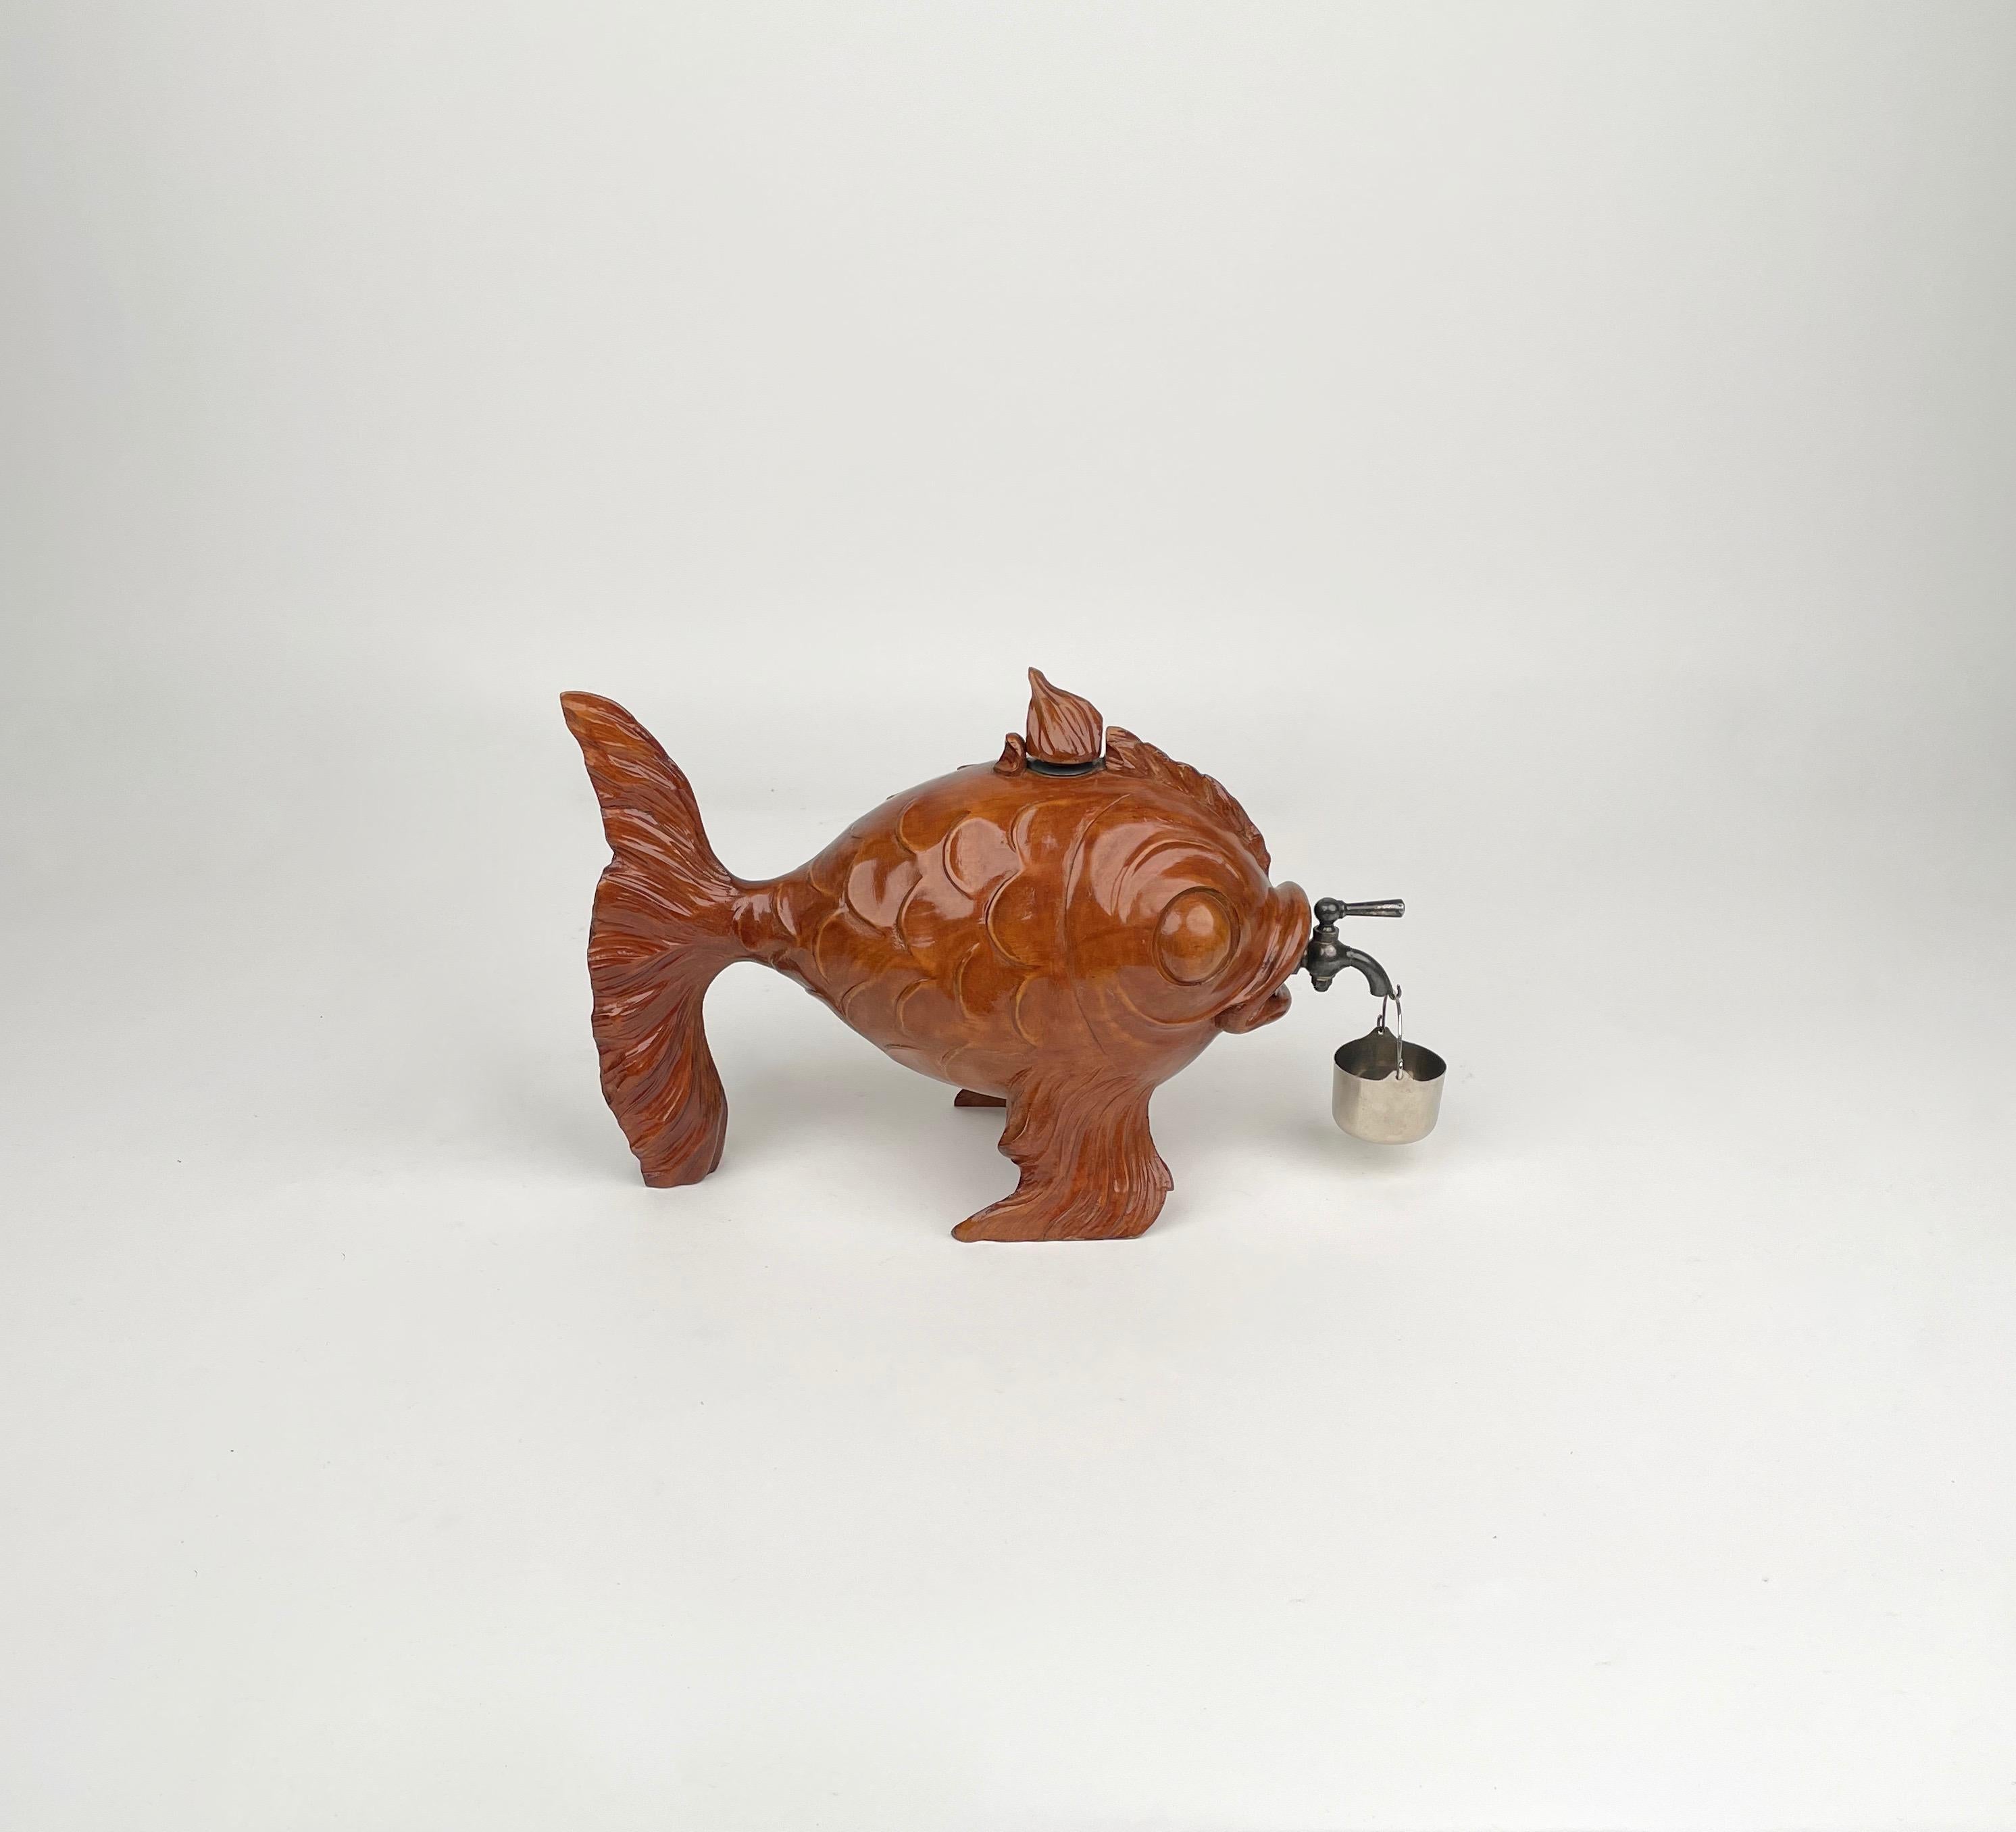 Fish Bottle Dispenser Hand Carved Wood & Metal Aldo Tura for Macabo Italy 1950s 3